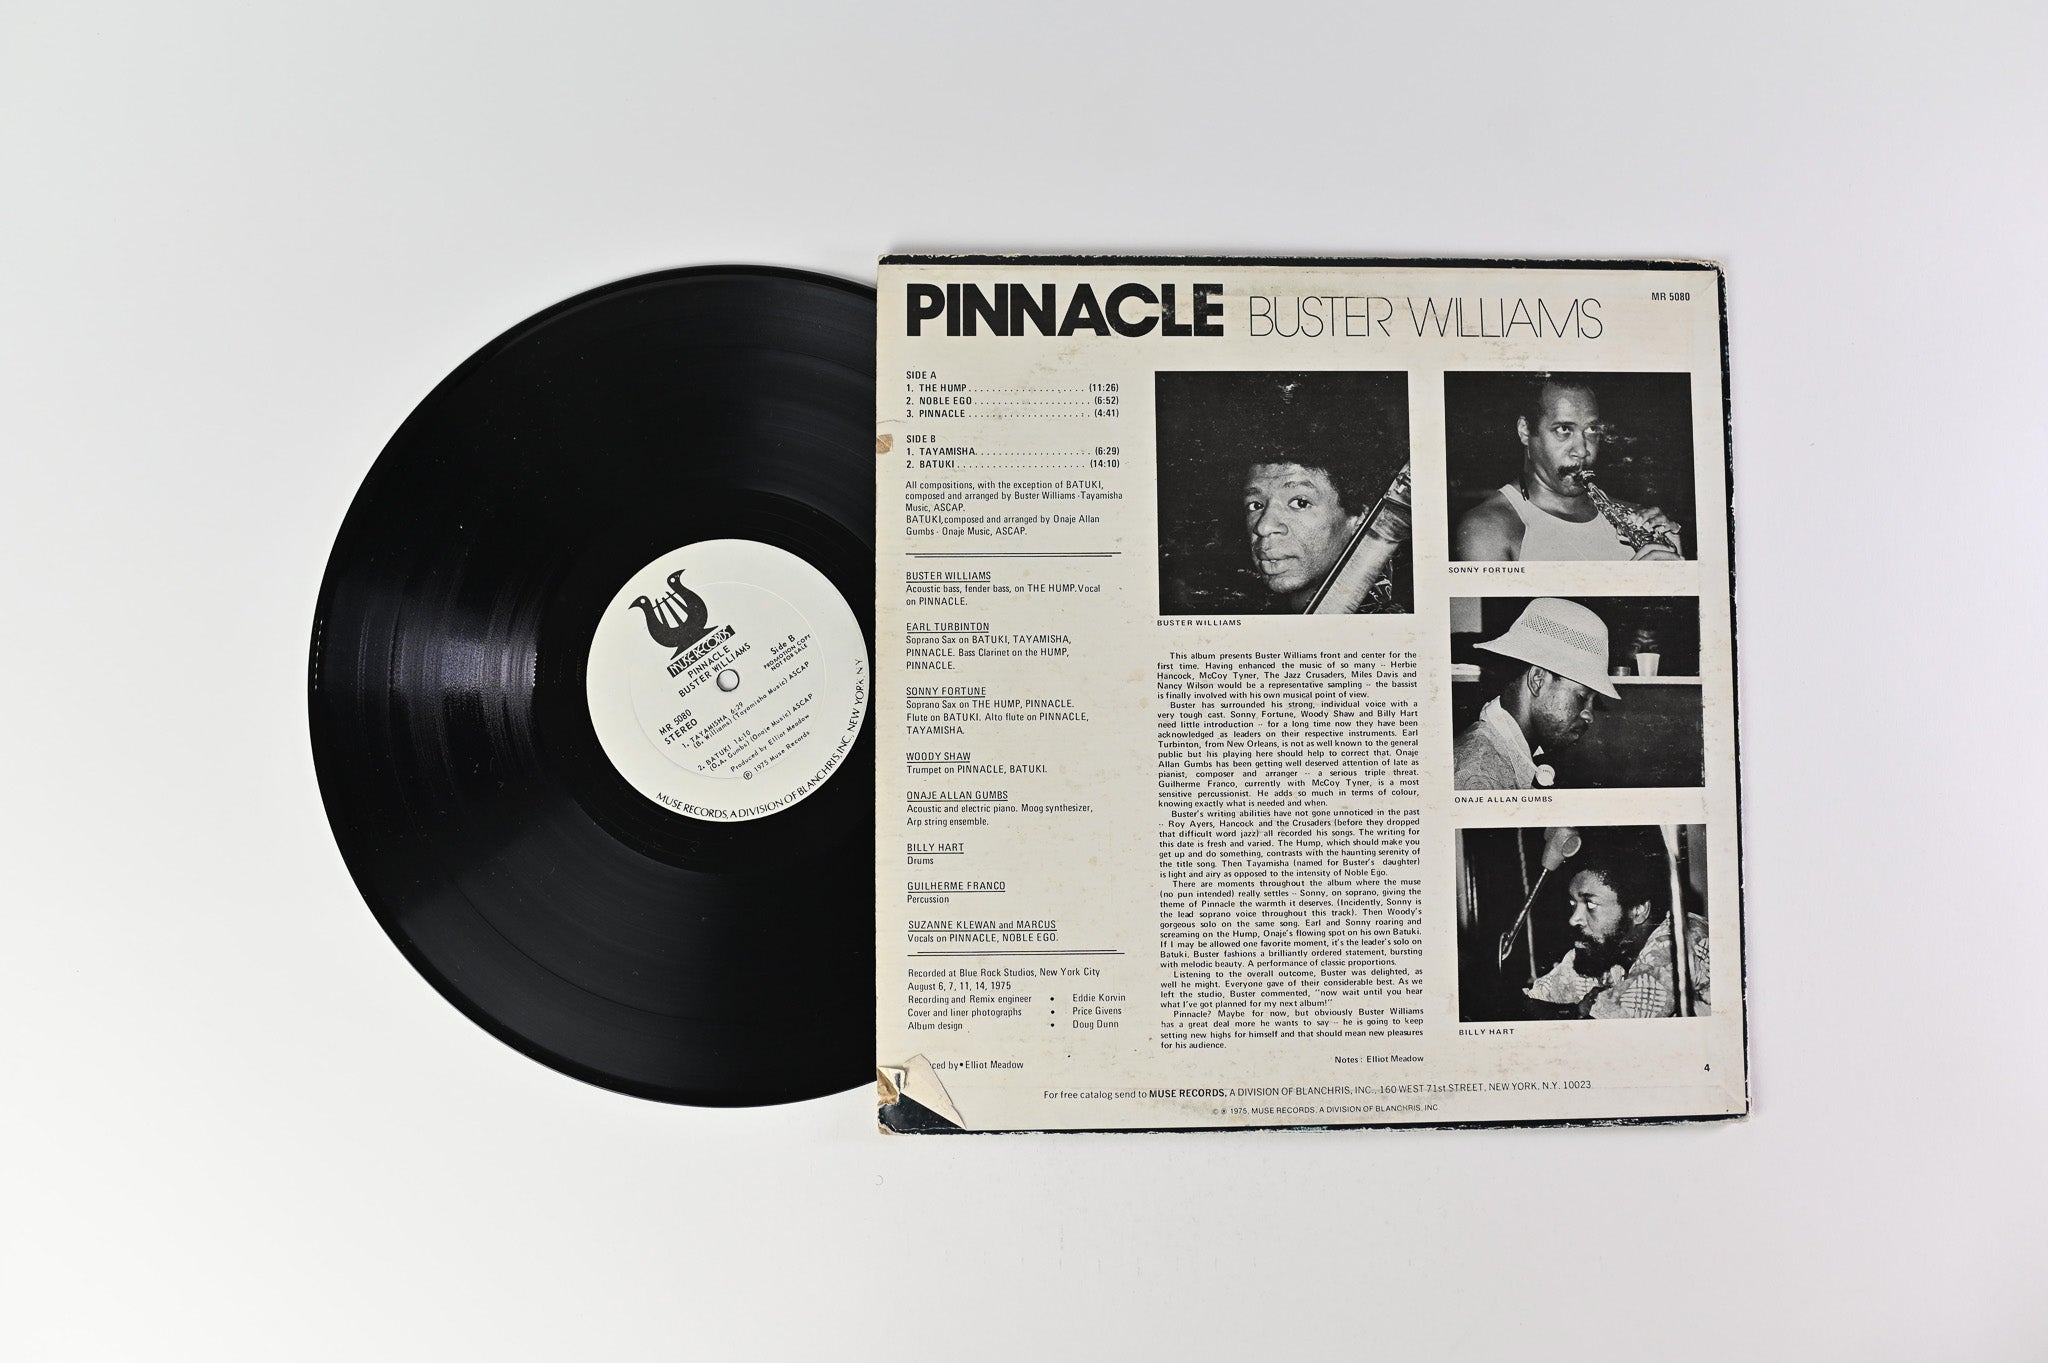 Buster Williams - Pinnacle on Muse Promo